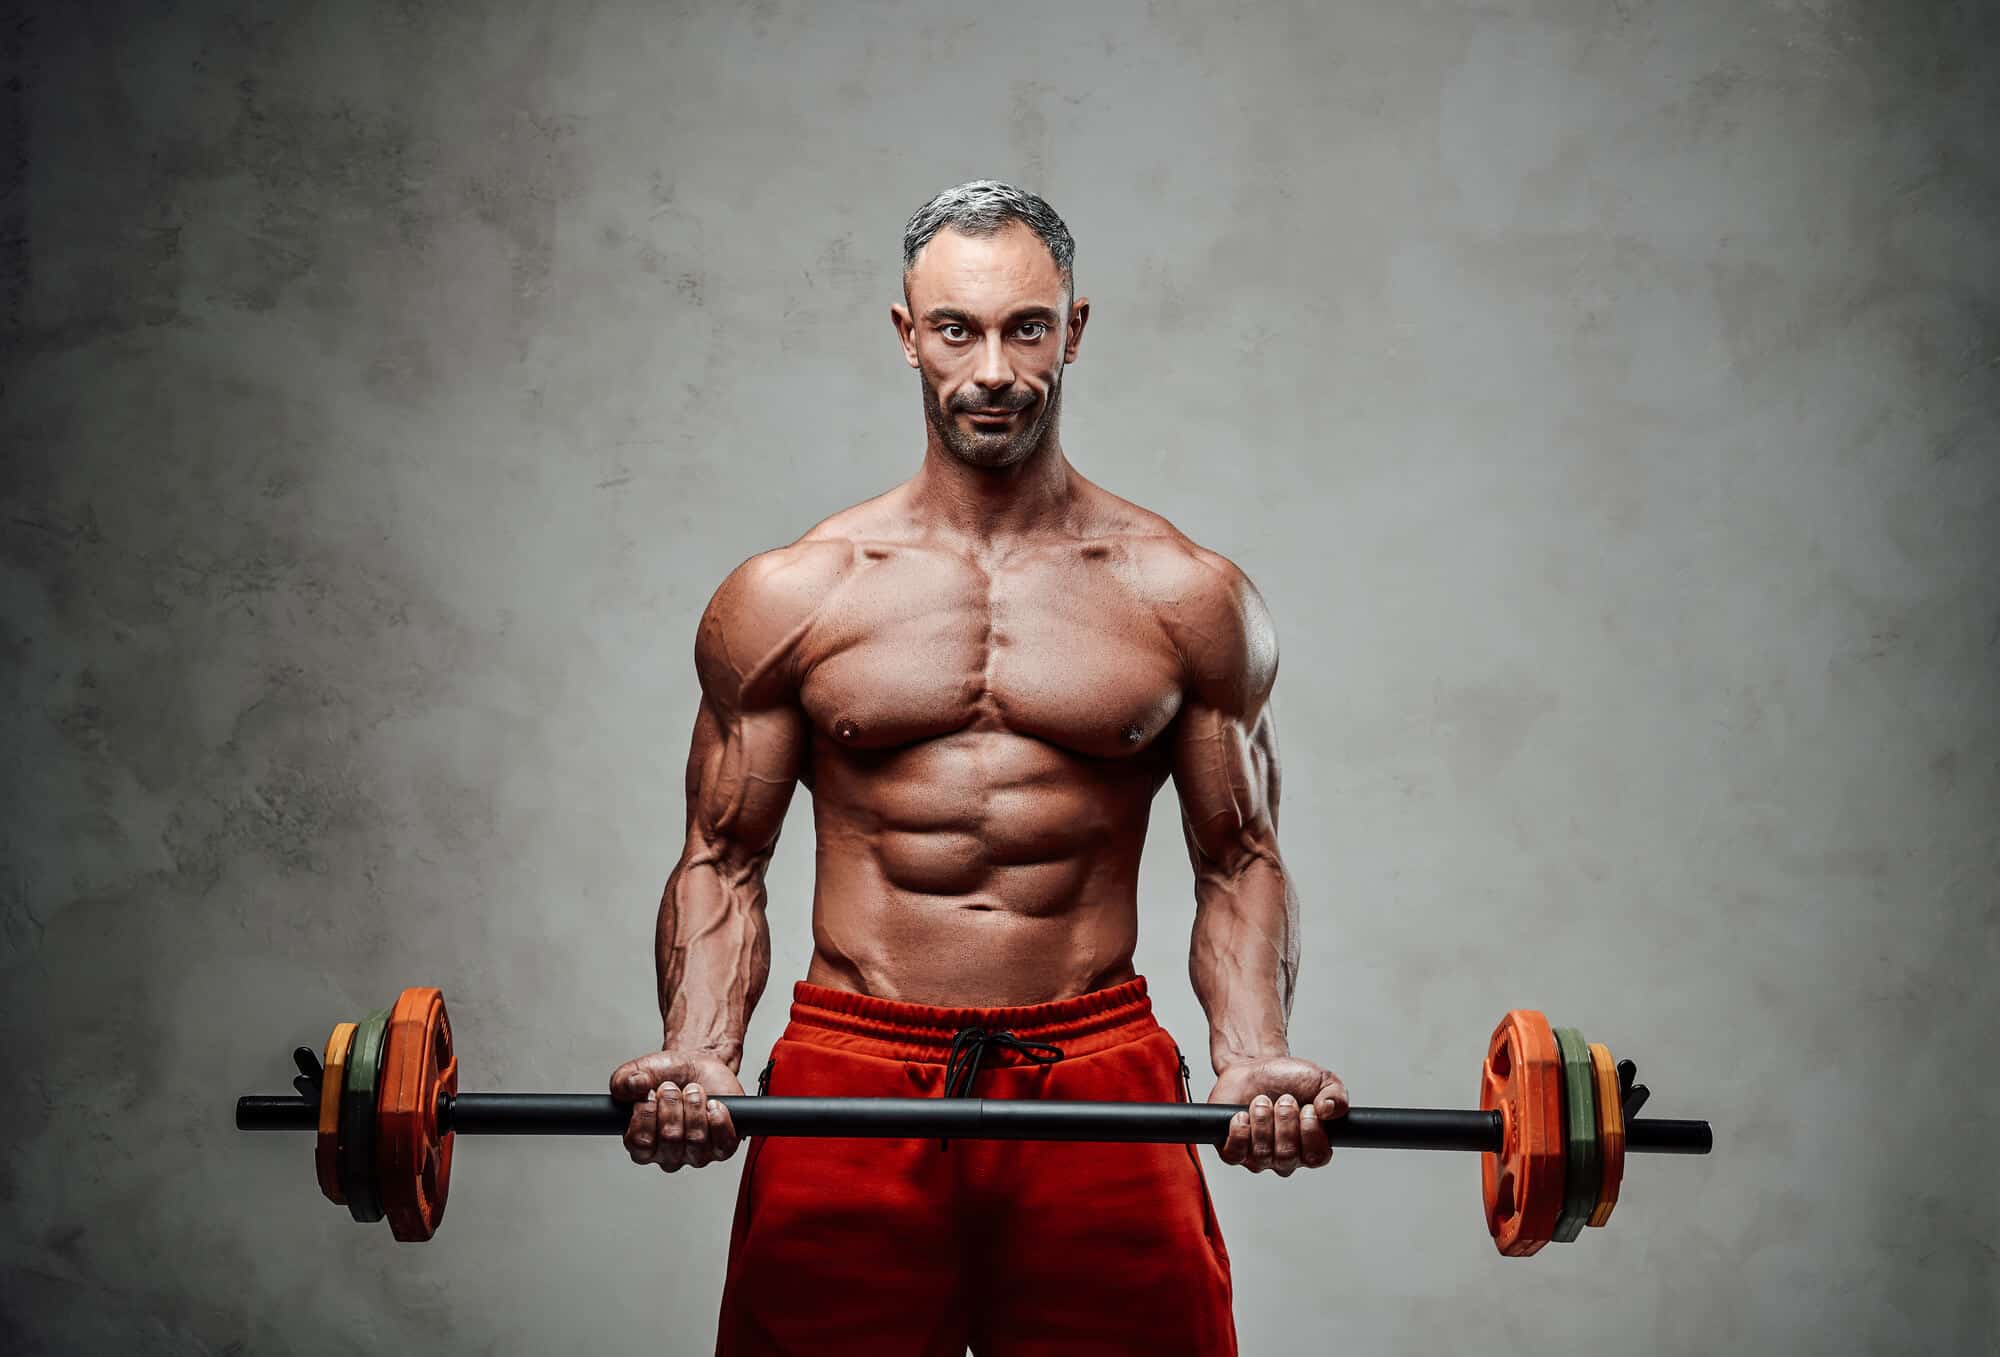 Training Programs for 40 plus that will get you ripped